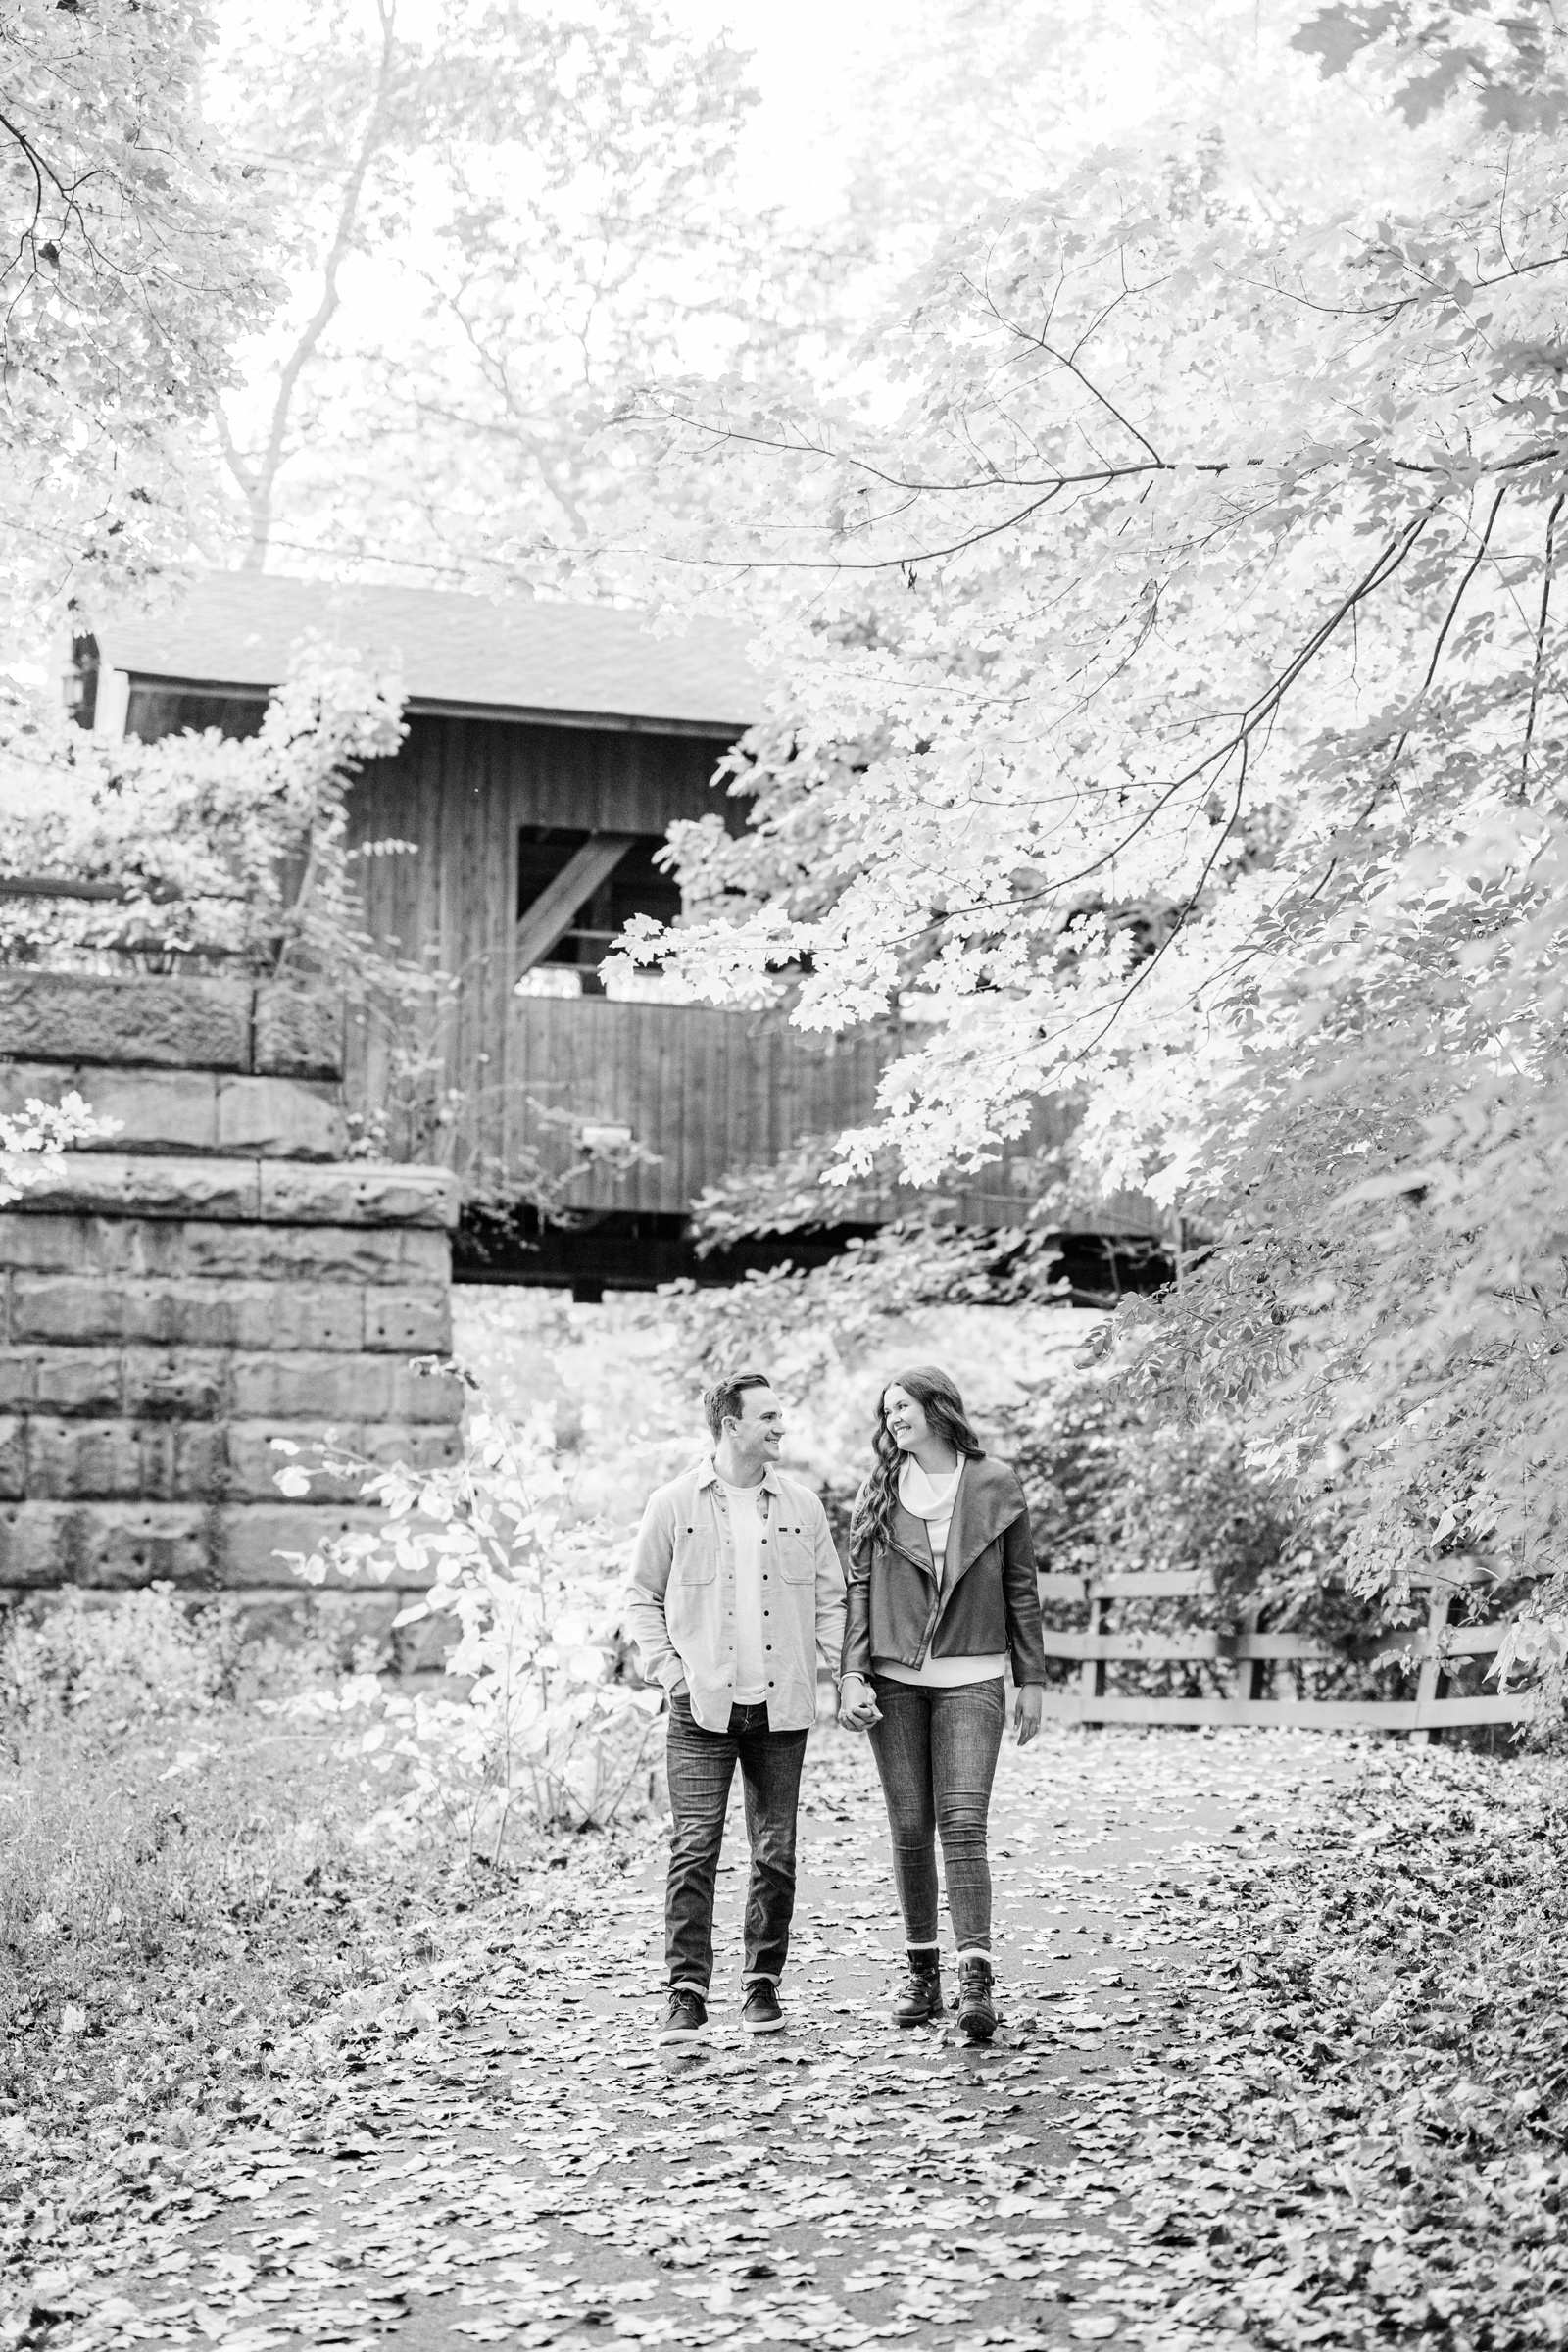 Fall Engagement Session at David Fortier River Park in Olmsted Falls, Ohio